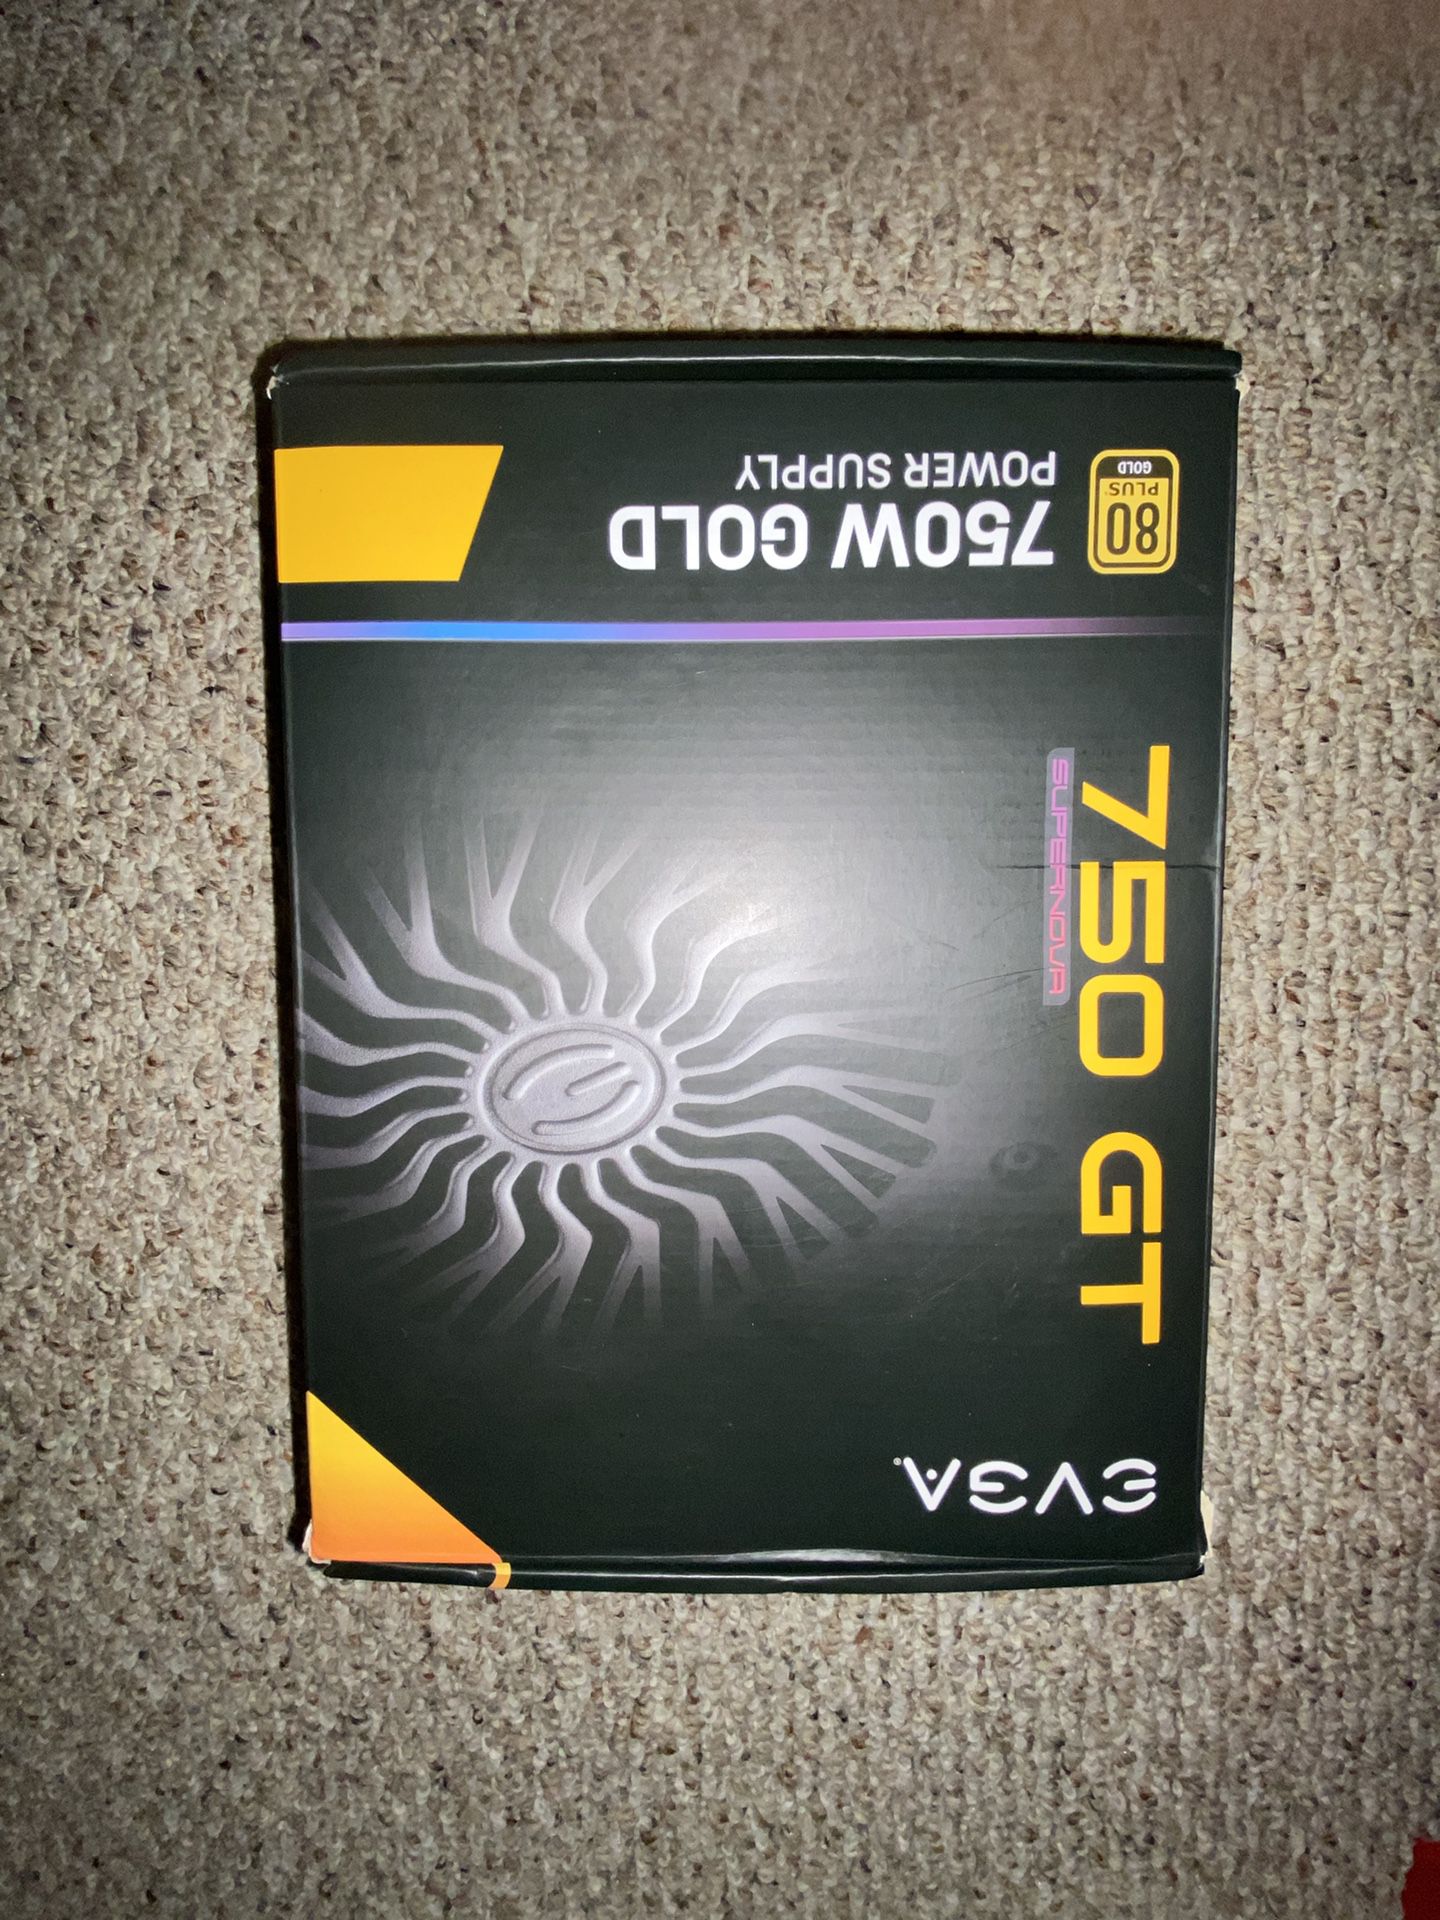 Selling A Brad New 750W Gold Power Supply For $100